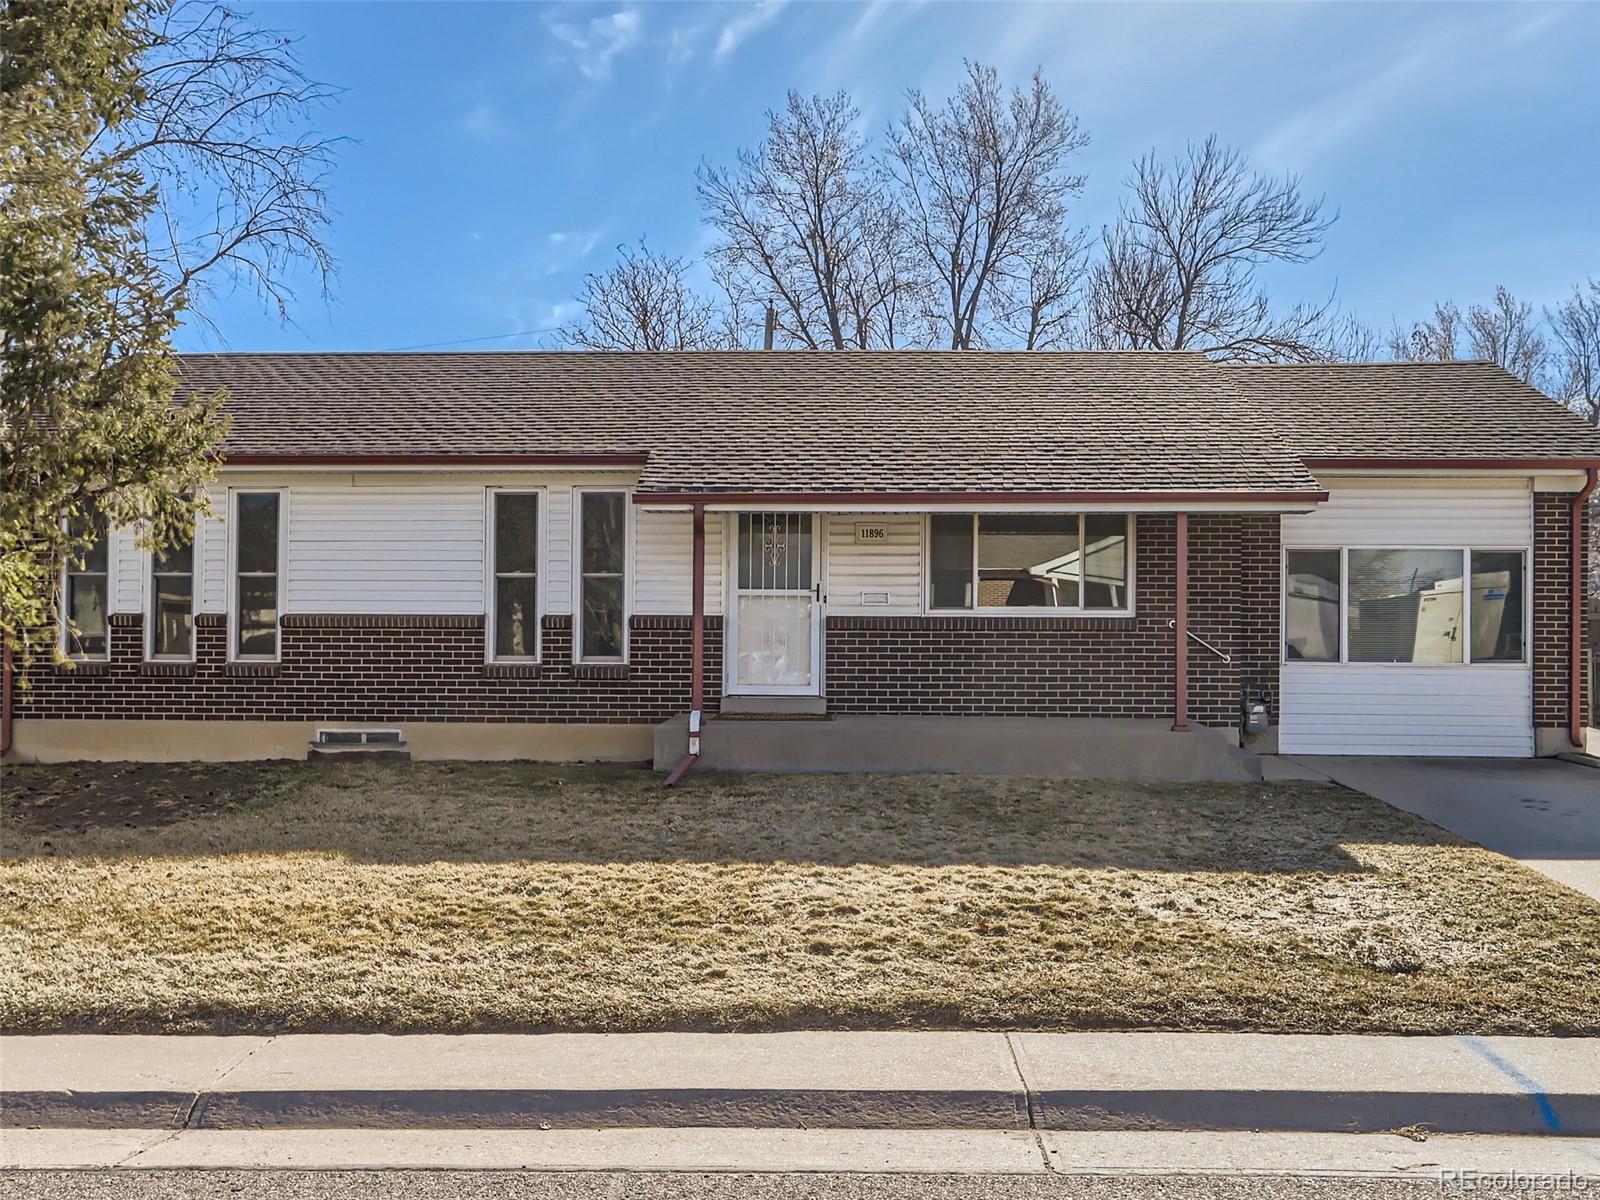 11896  mccrumb drive, Northglenn sold home. Closed on 2024-04-19 for $485,000.